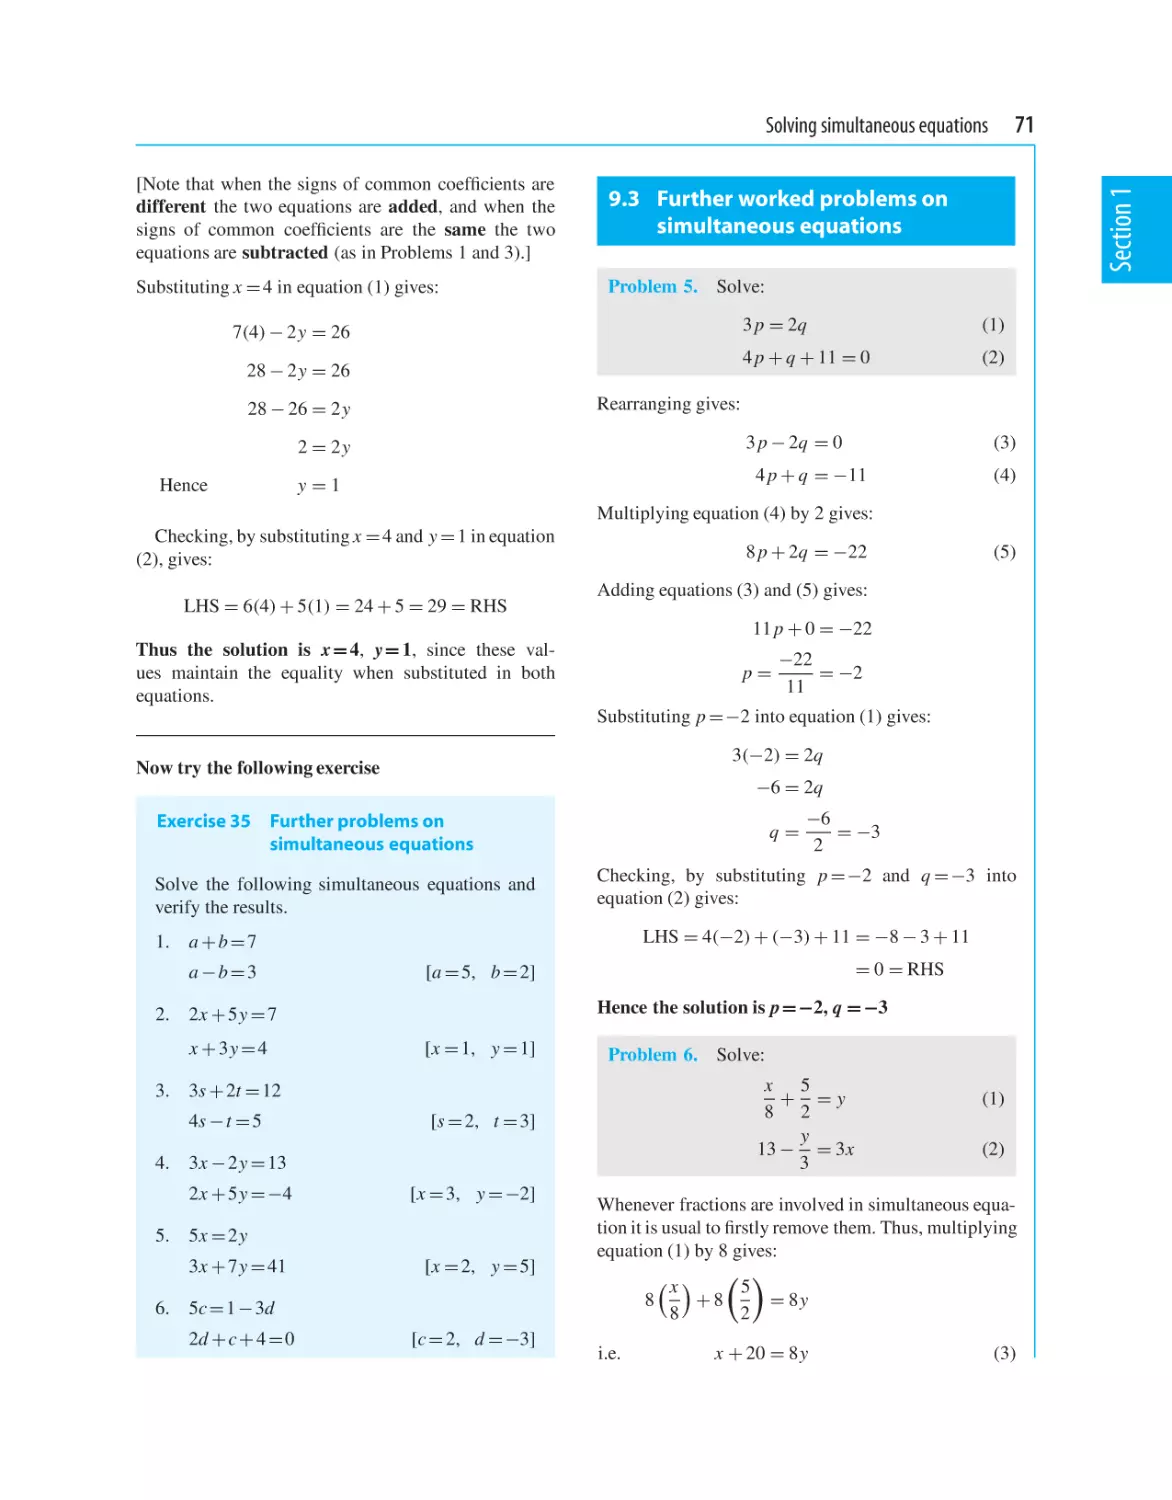 9.3 Further worked problems on simultaneous equations